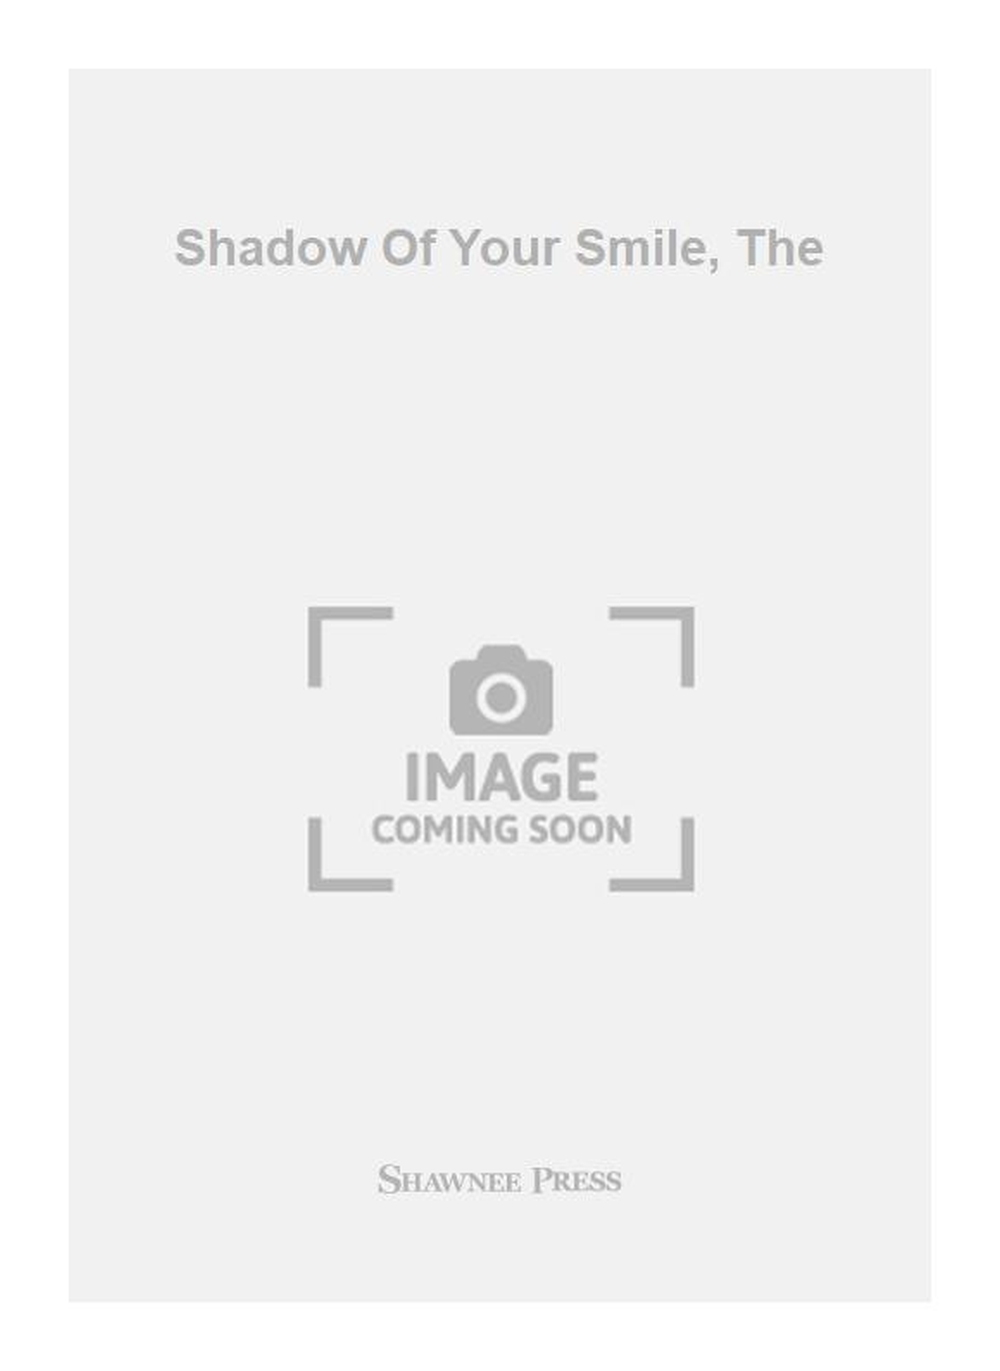 Strommen: Shadow Of Your Smile  The